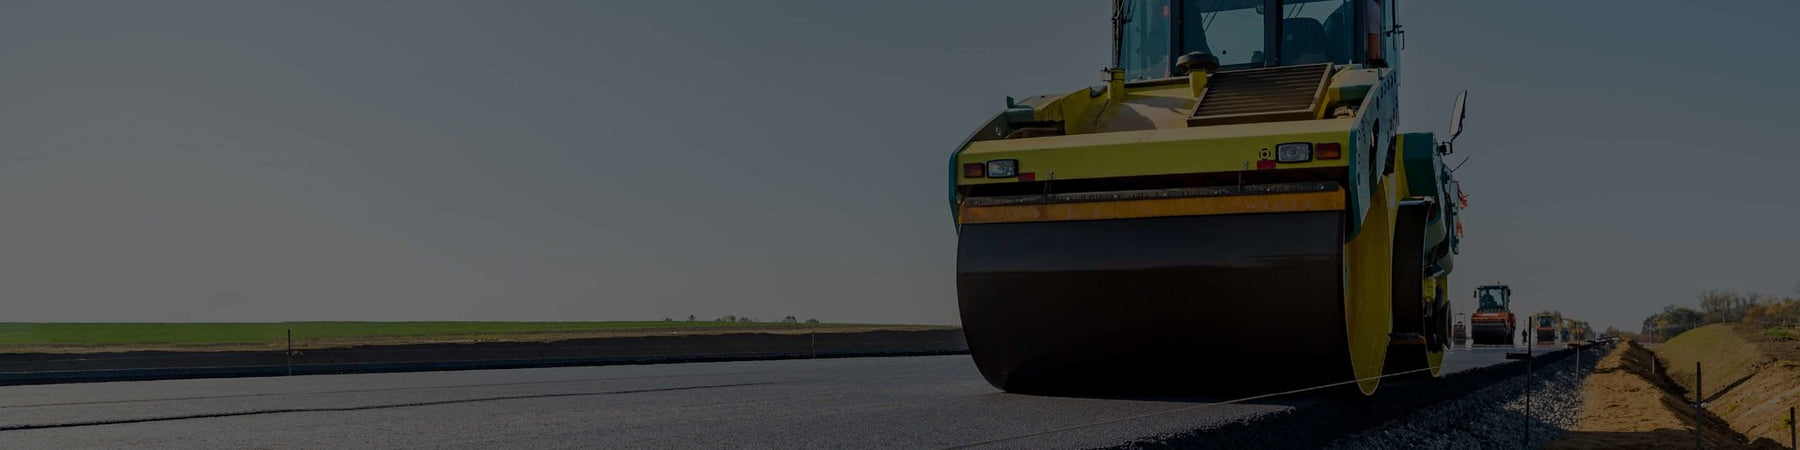 Road Rollers for Construction: What You Need to Know